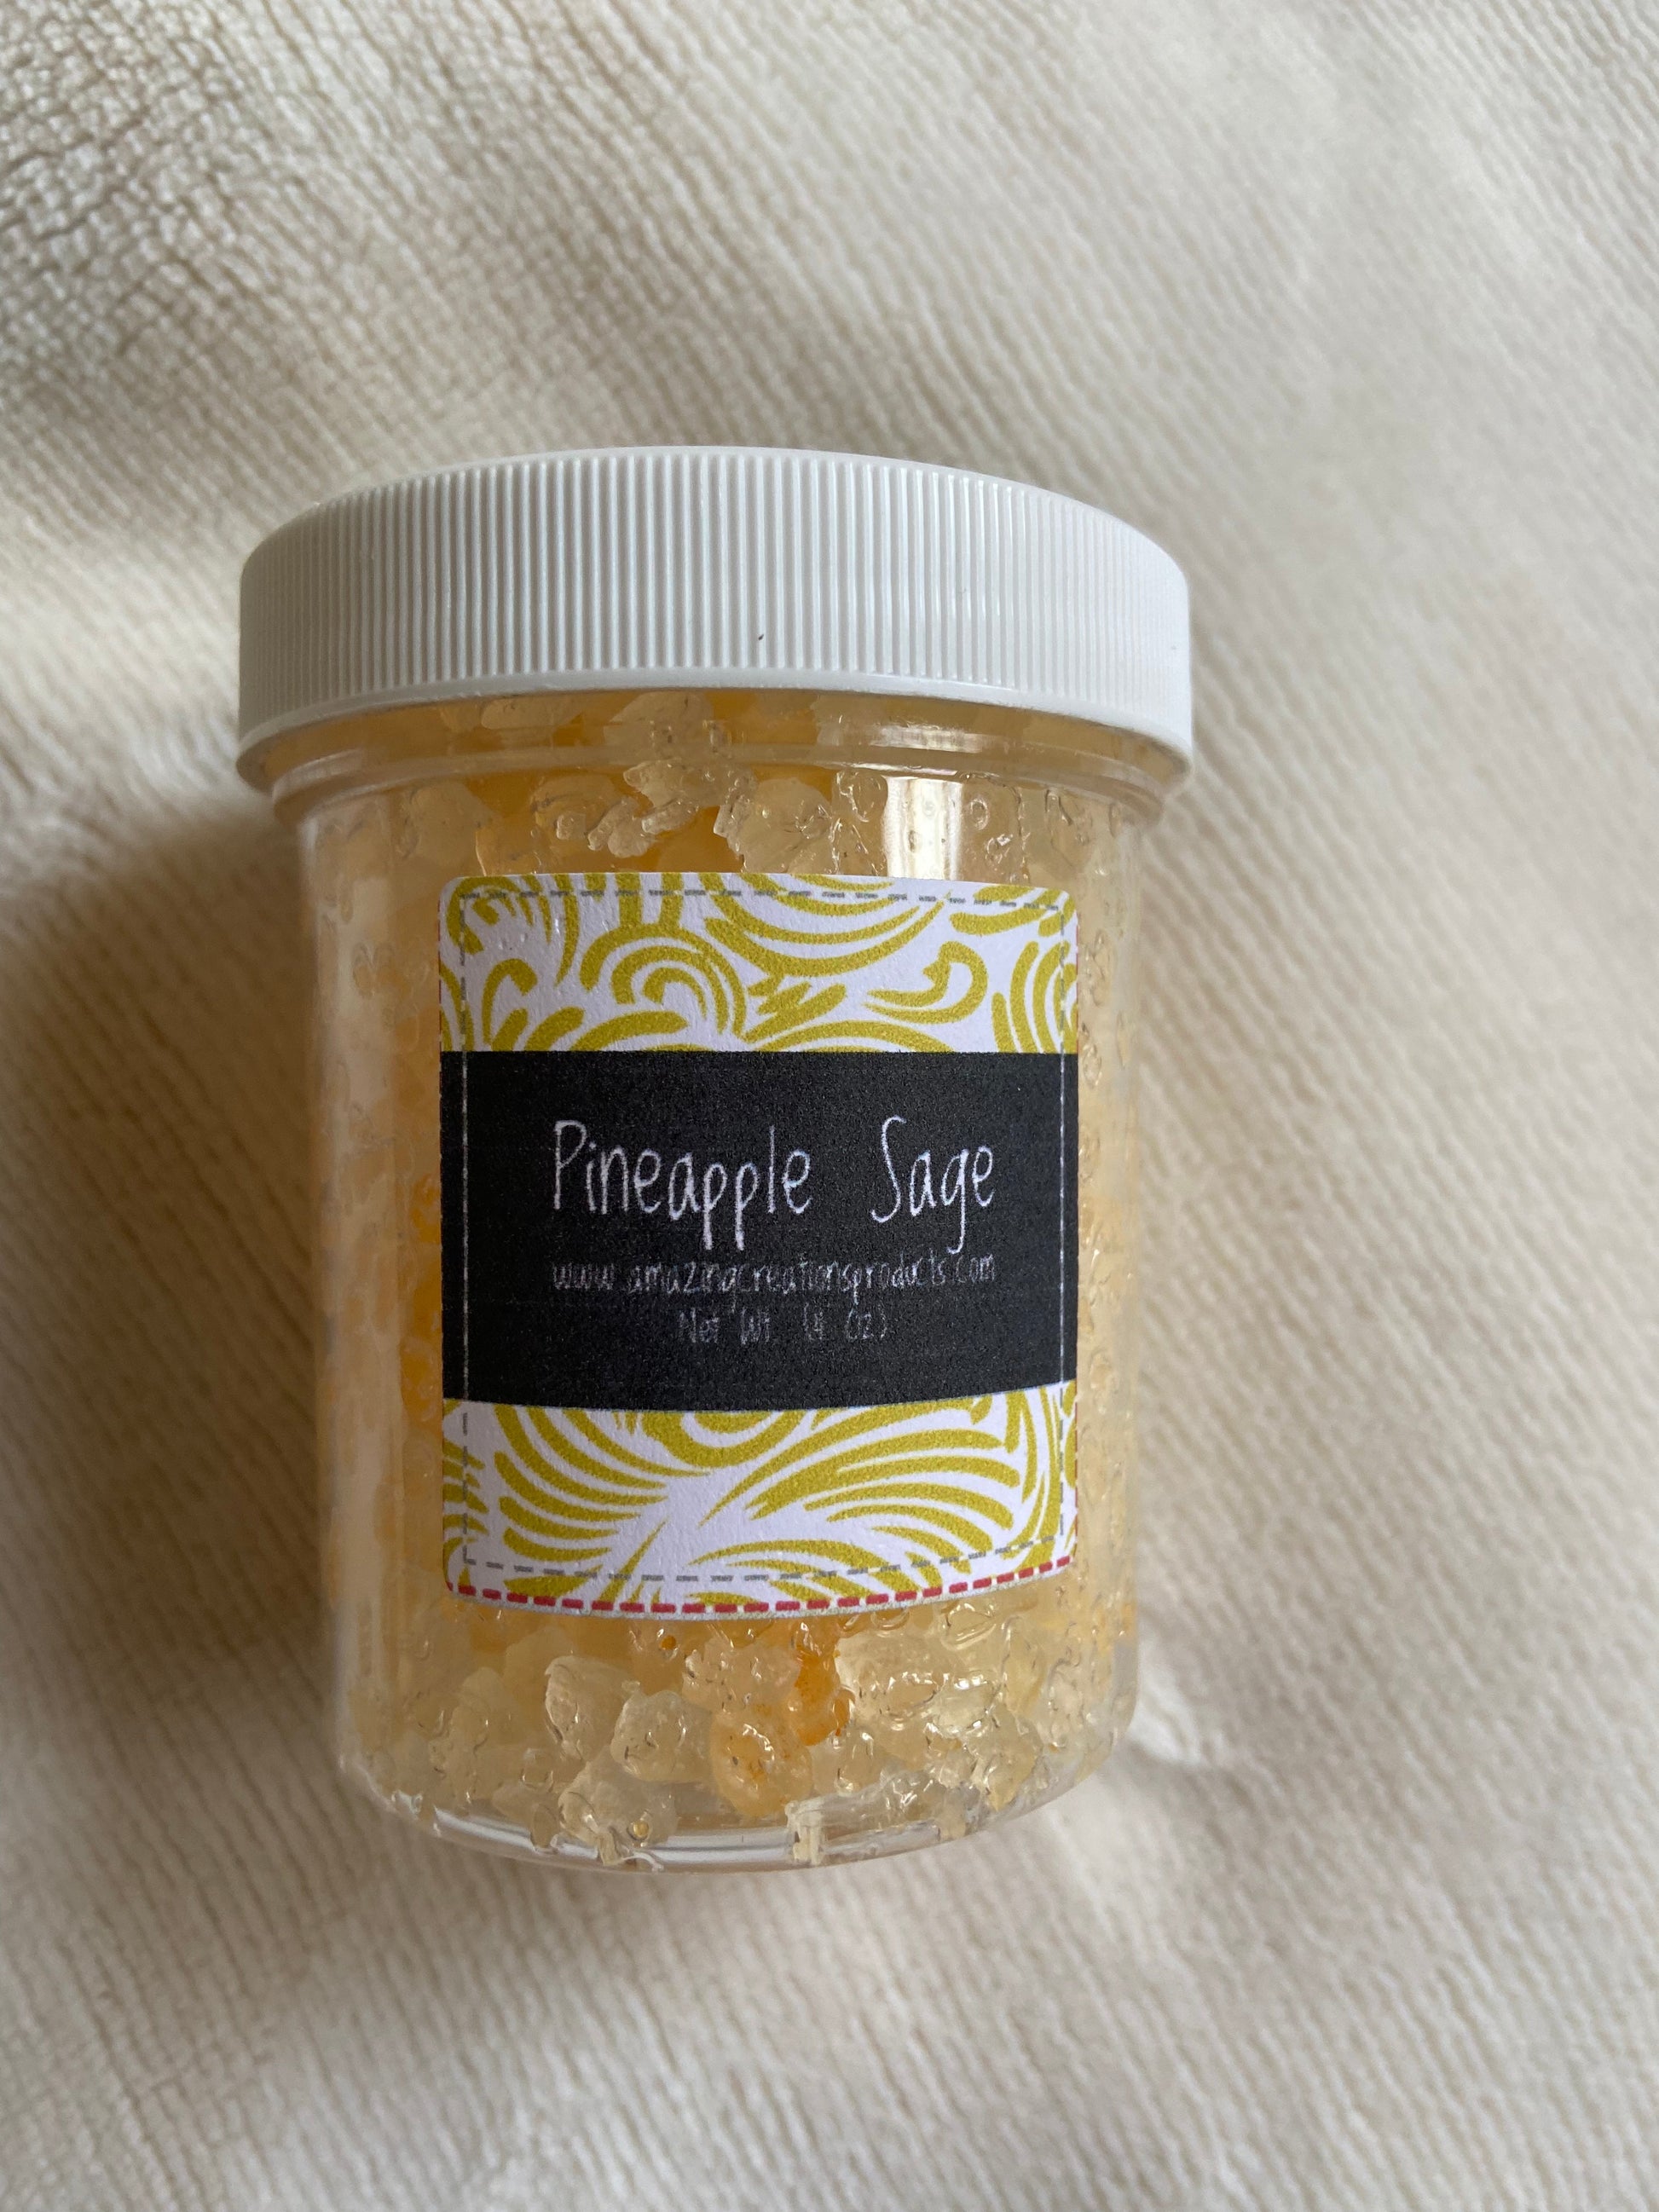  Pineapple Sage Bath Salt - Bath Salts available at Amazing Creations Products . Grab yours for $11 today!